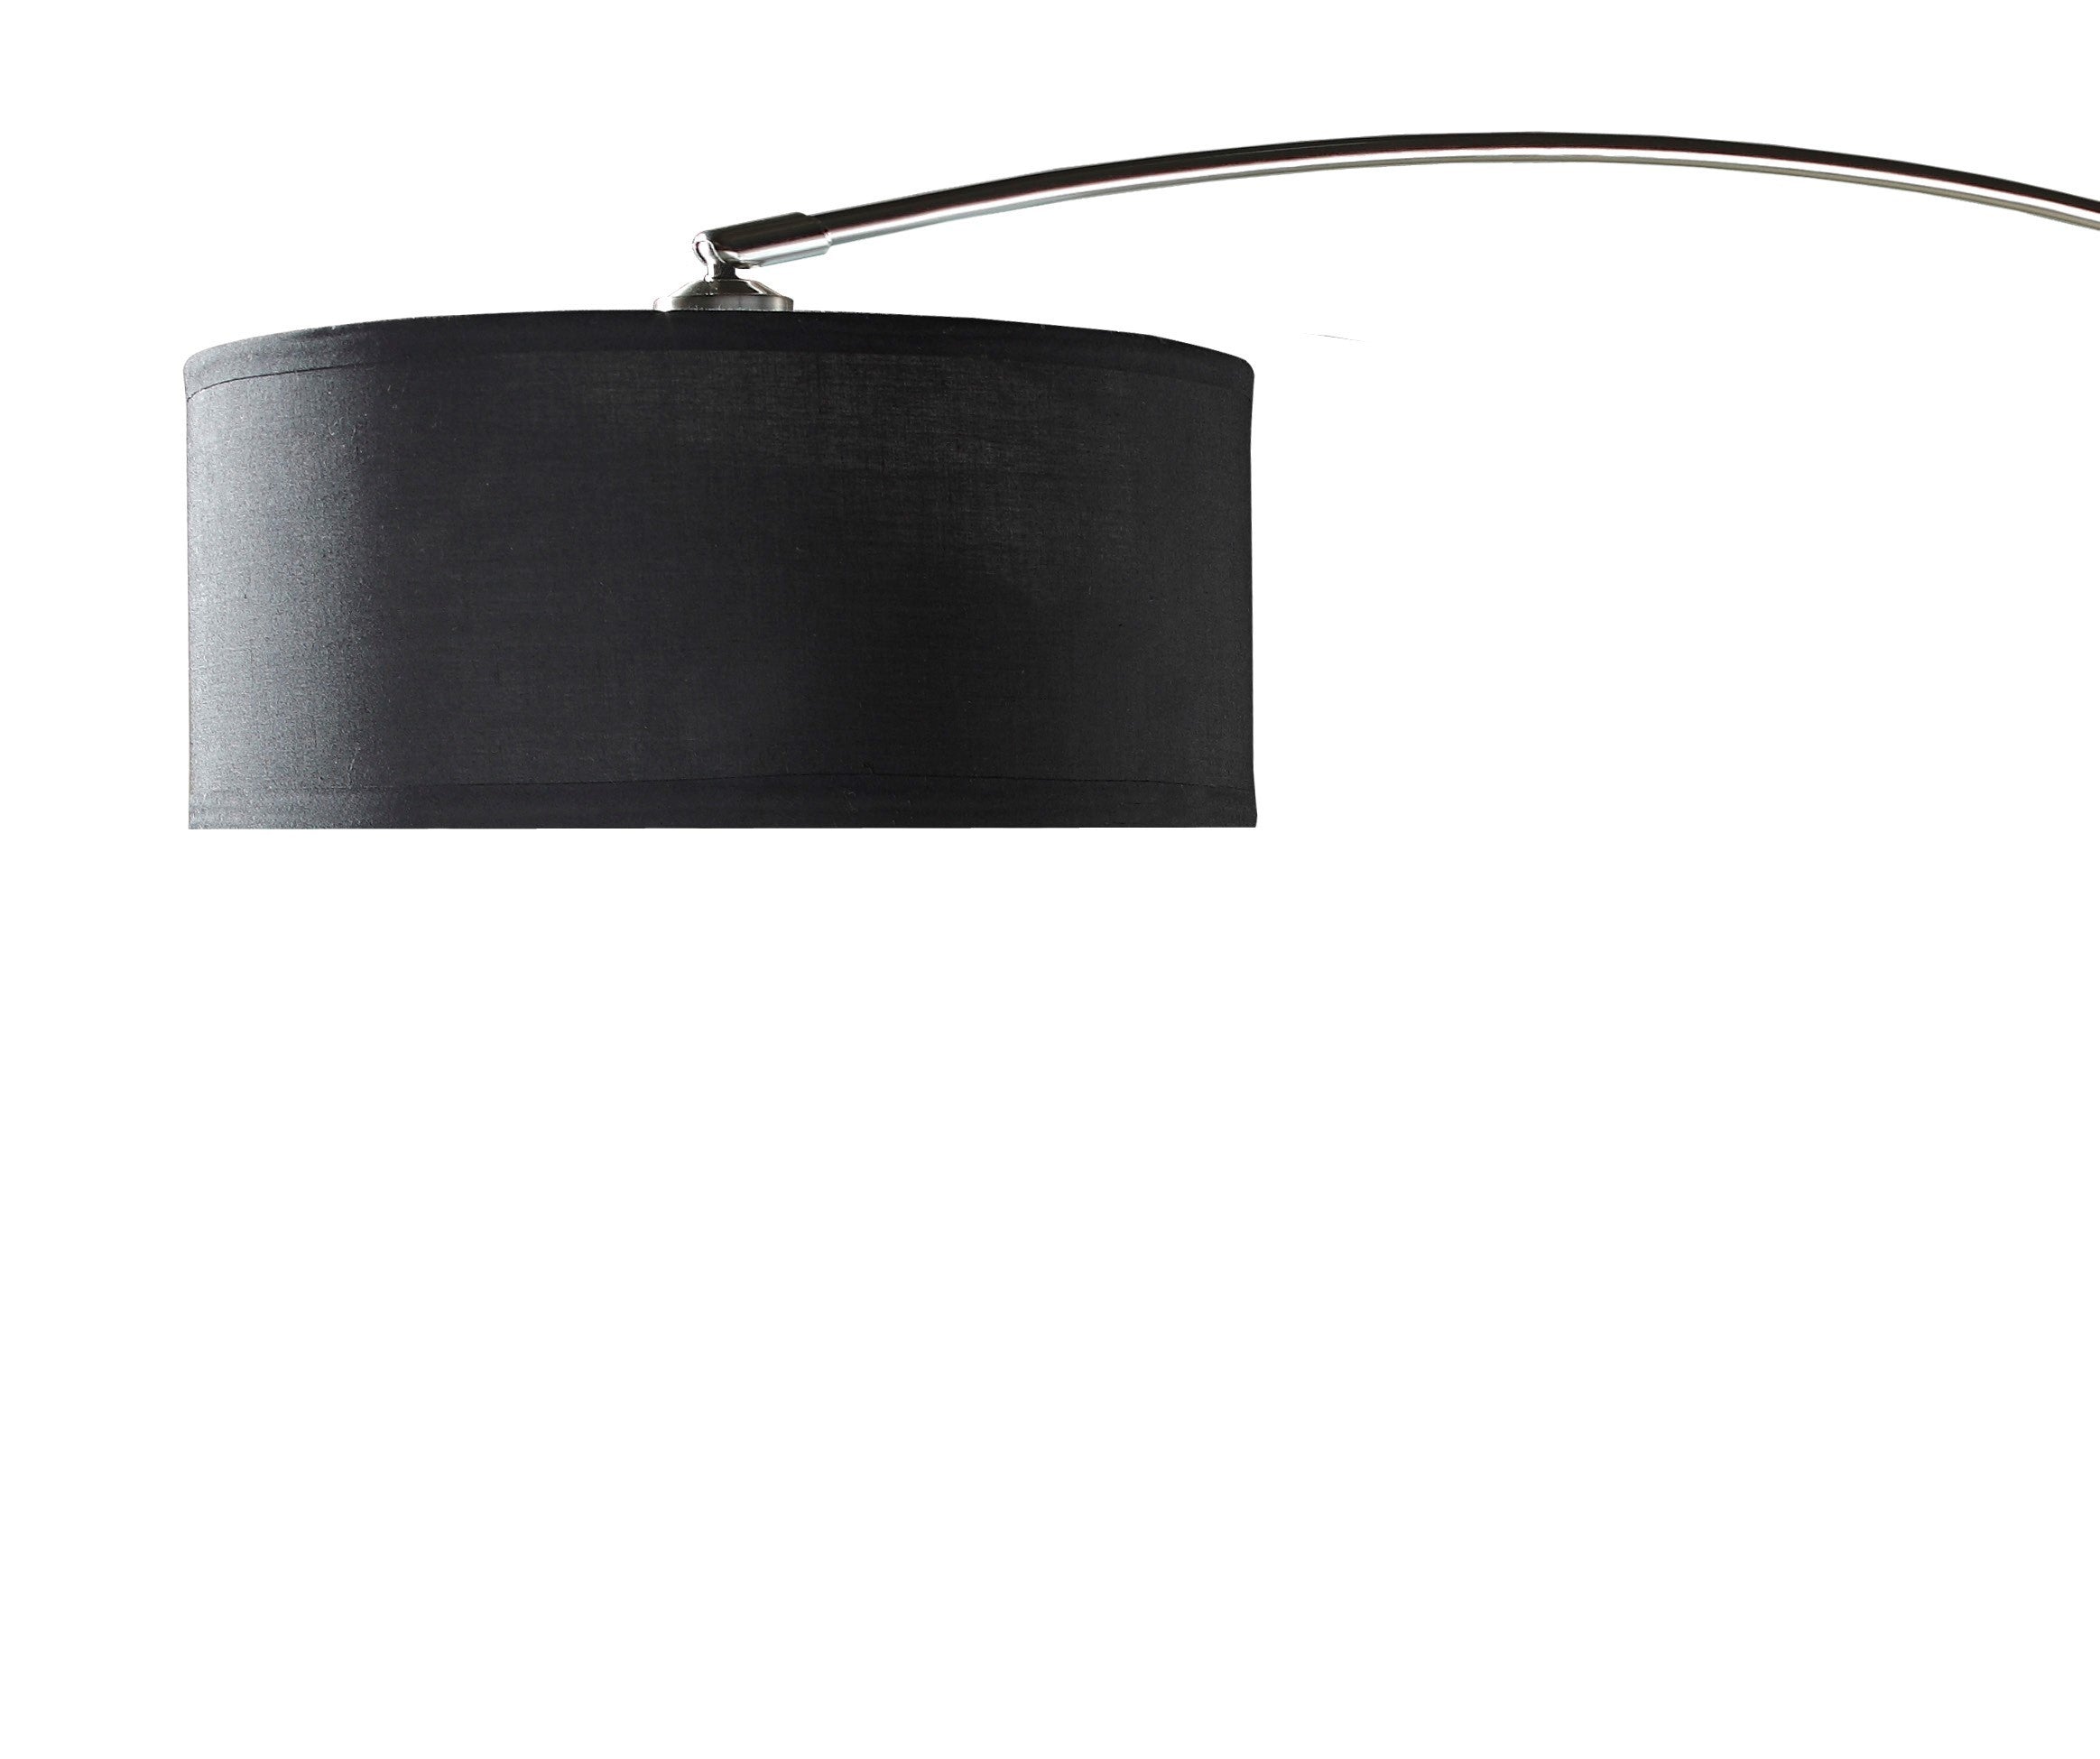 81"H Black Arch with Adjustable Body Floor Lamp